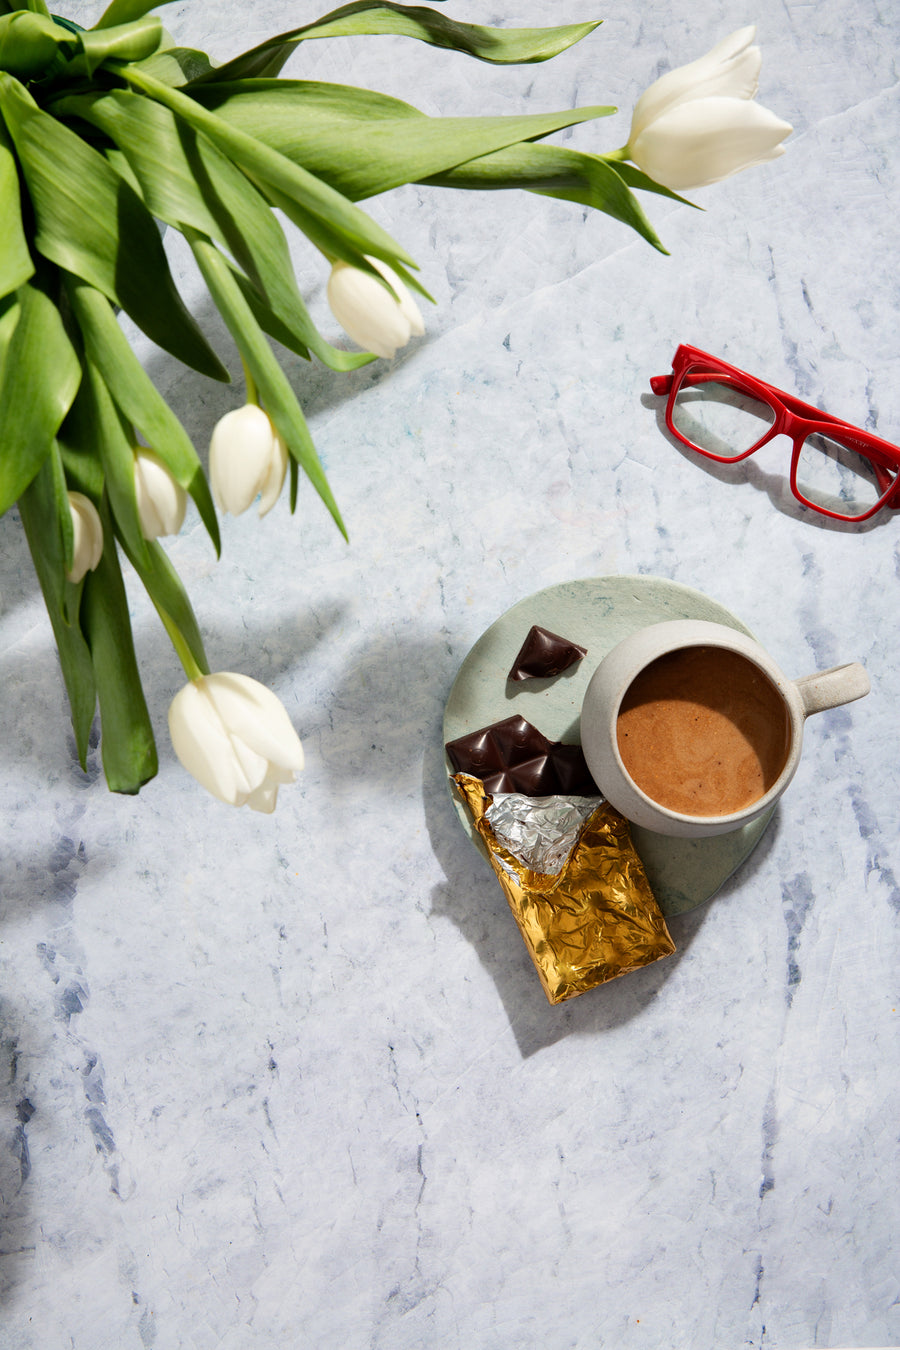 Light blue stone photography surface with tulips, coffee and chocolate